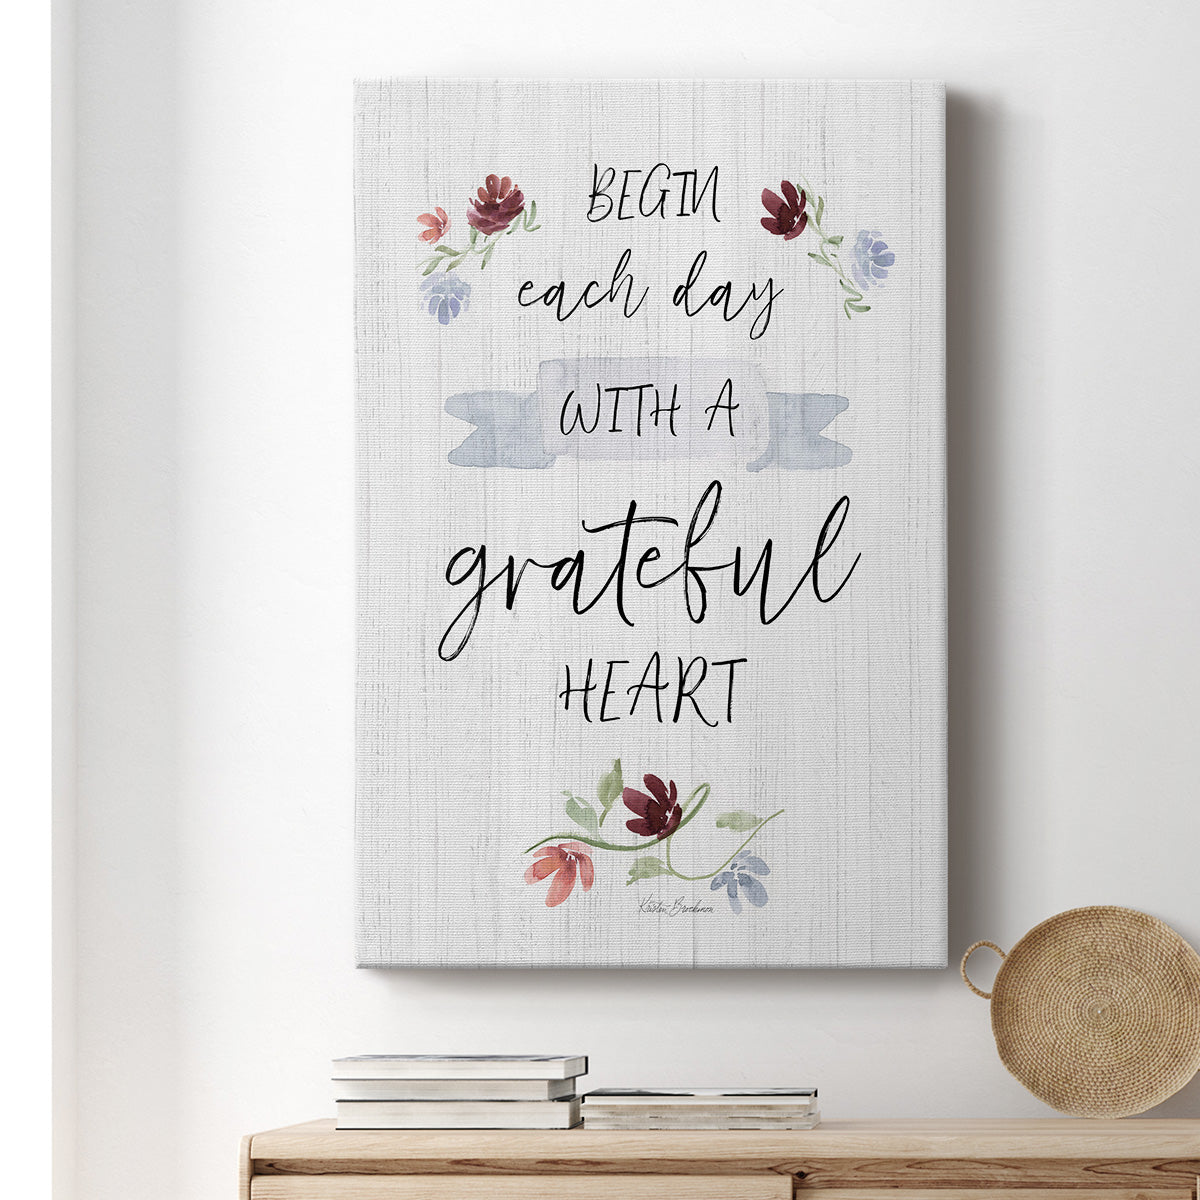 Grateful Heart Premium Gallery Wrapped Canvas - Ready to Hang